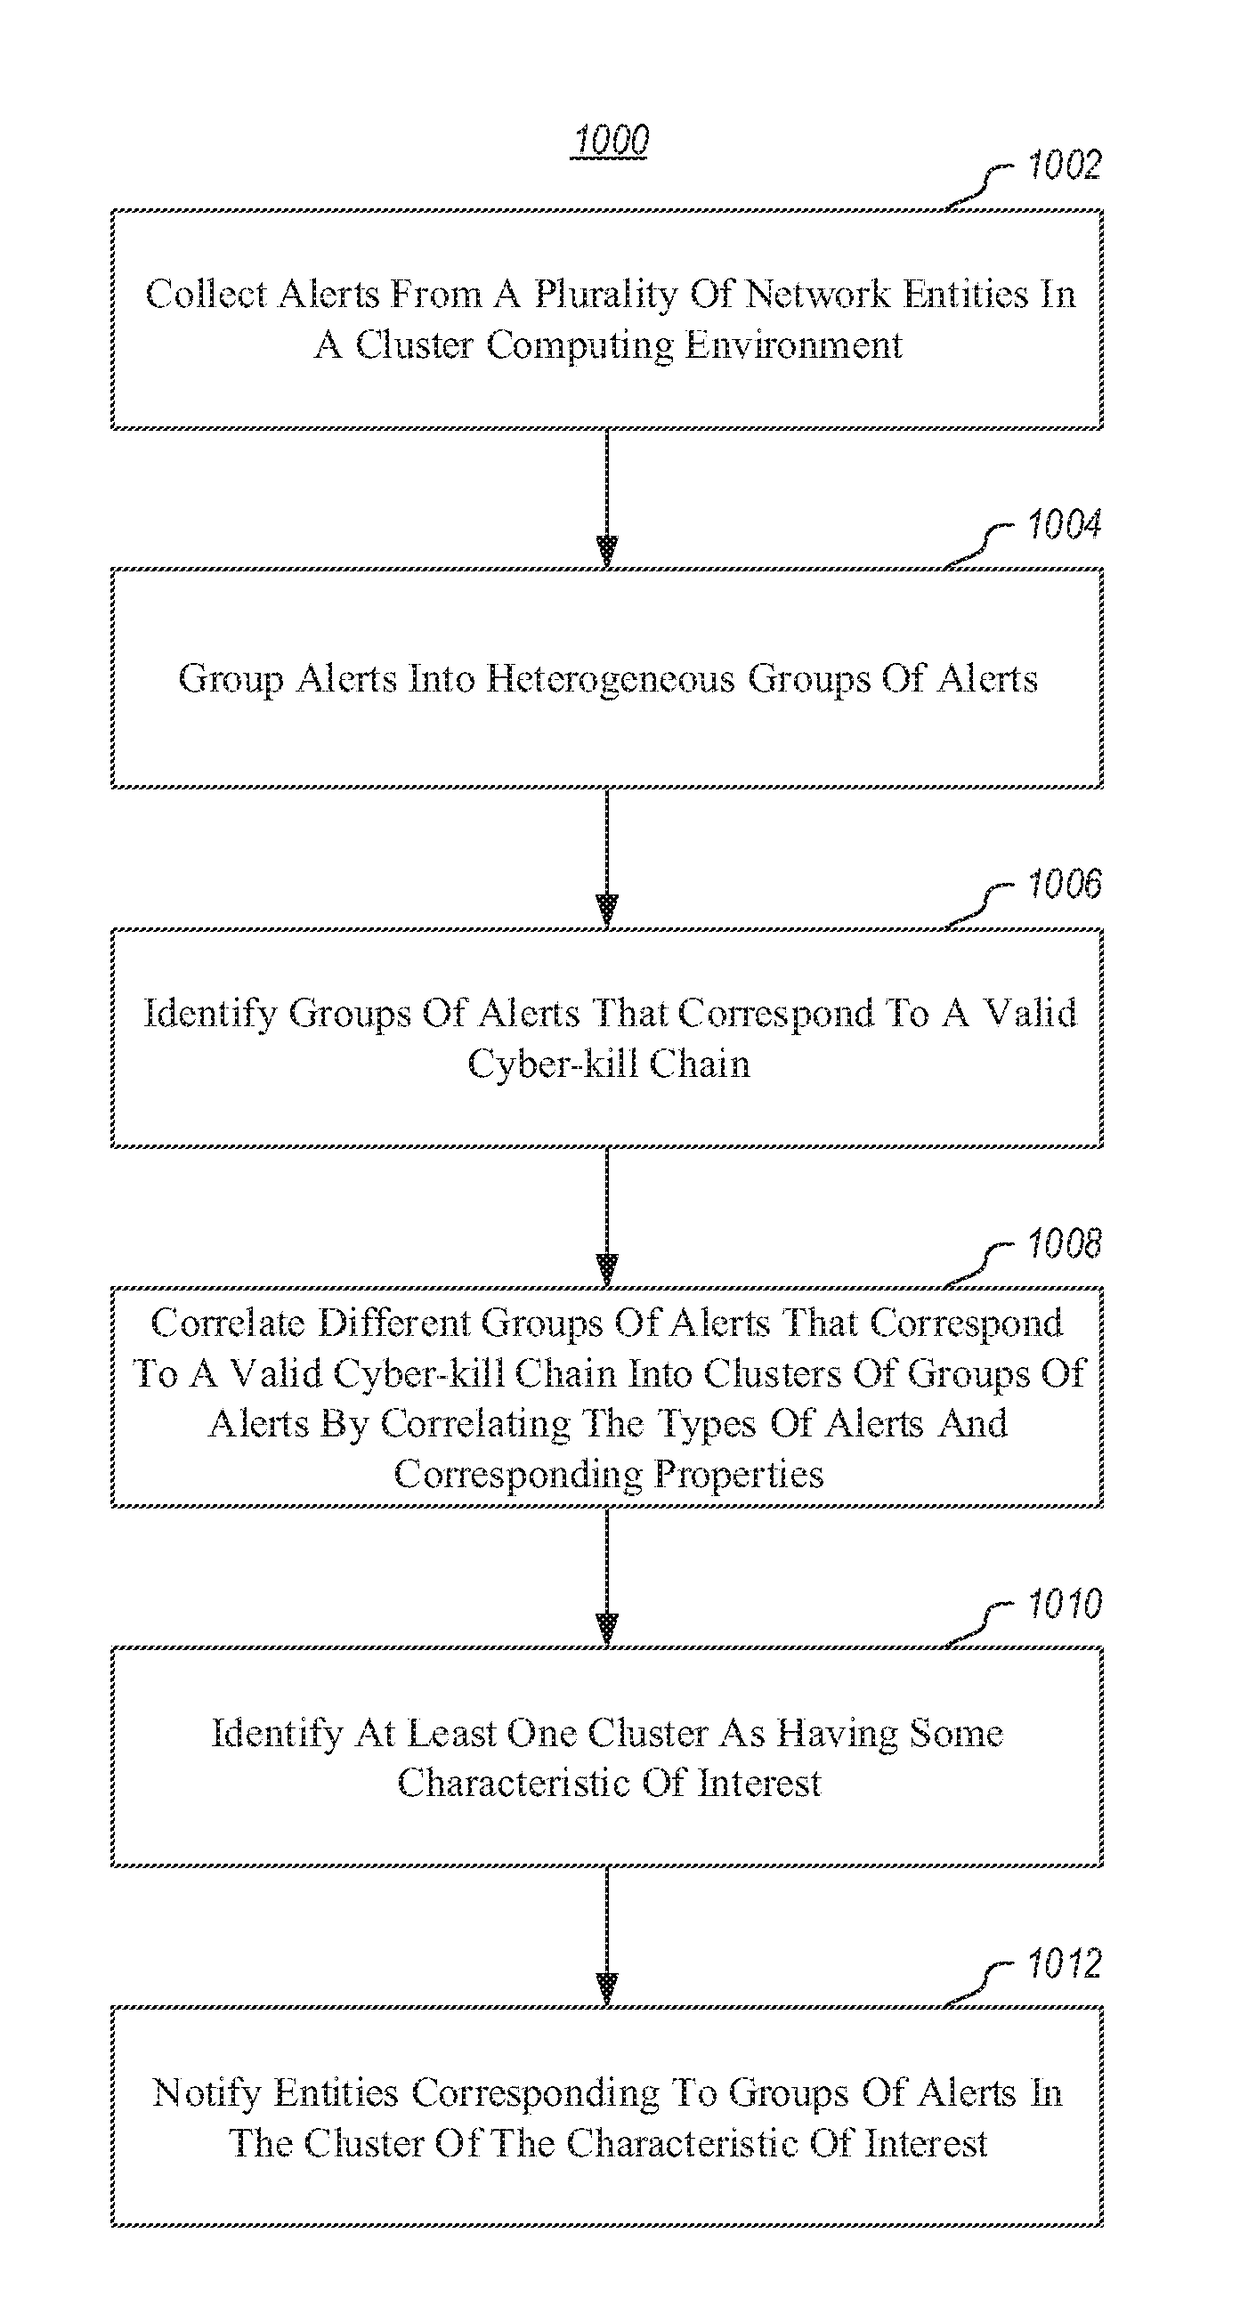 Detecting Cyber Attacks by Correlating Alerts Sequences in a Cluster Environment